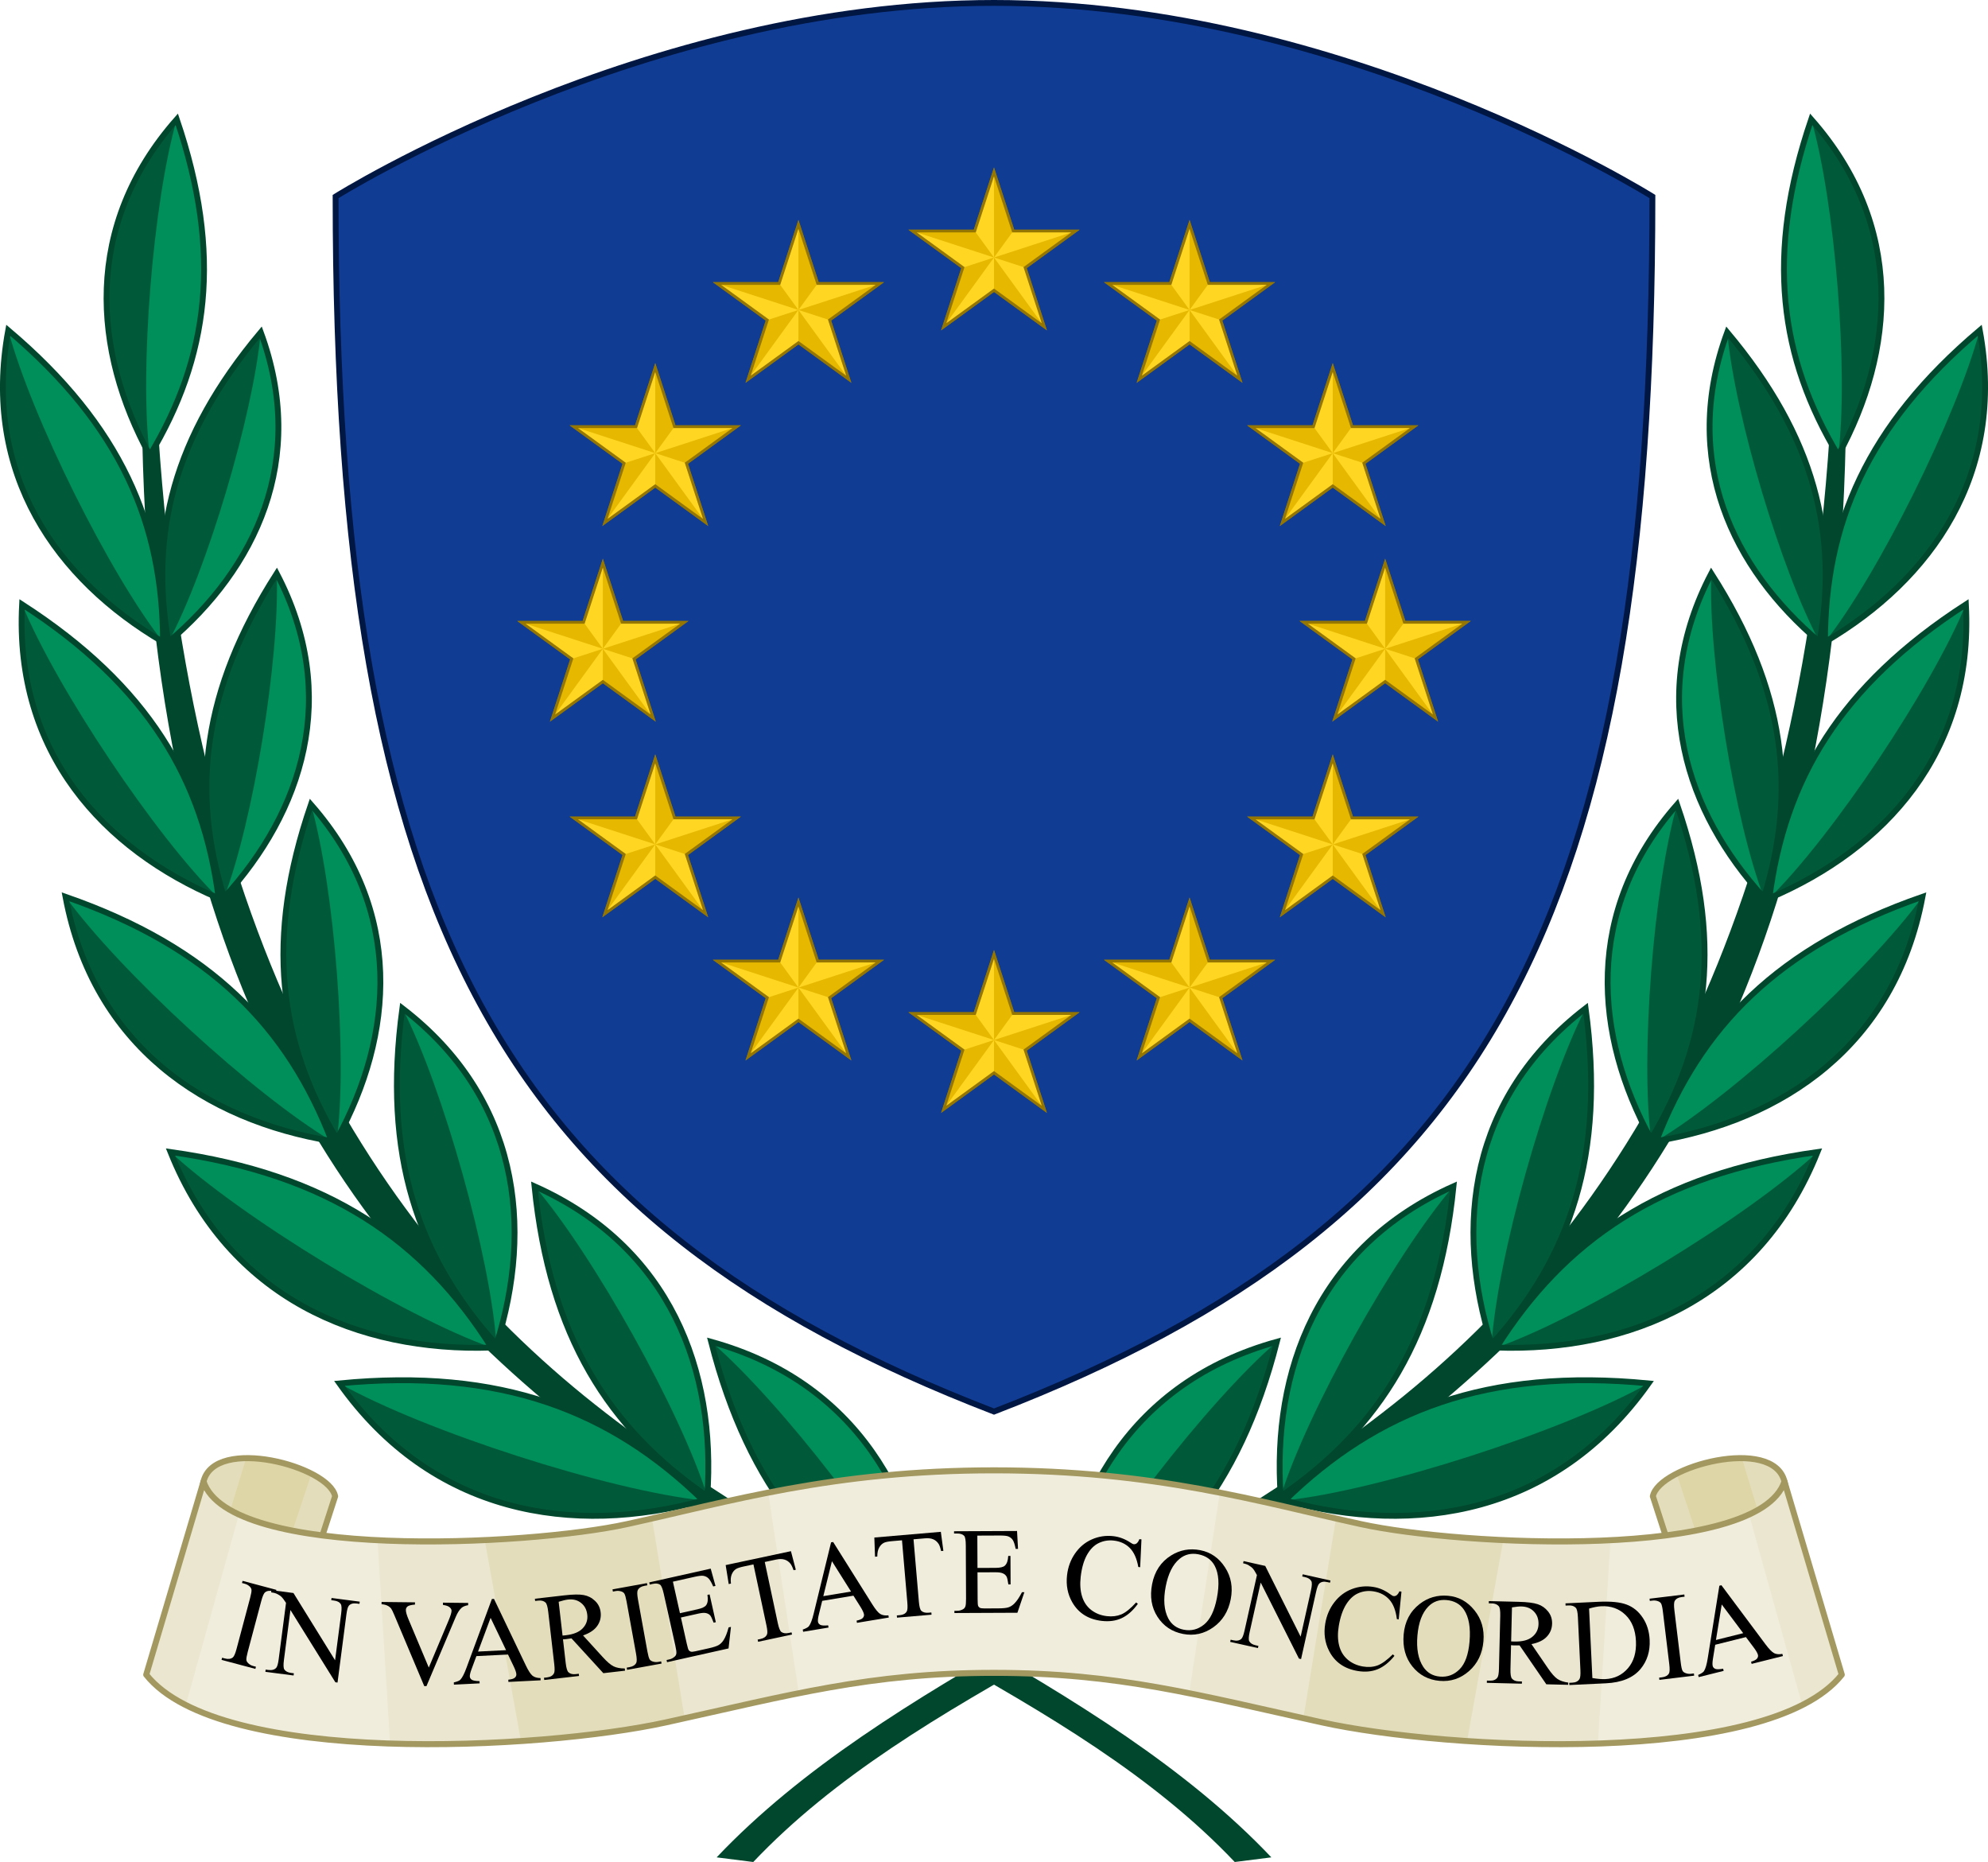 A Blue Shield With Yellow Stars And Green Leaves